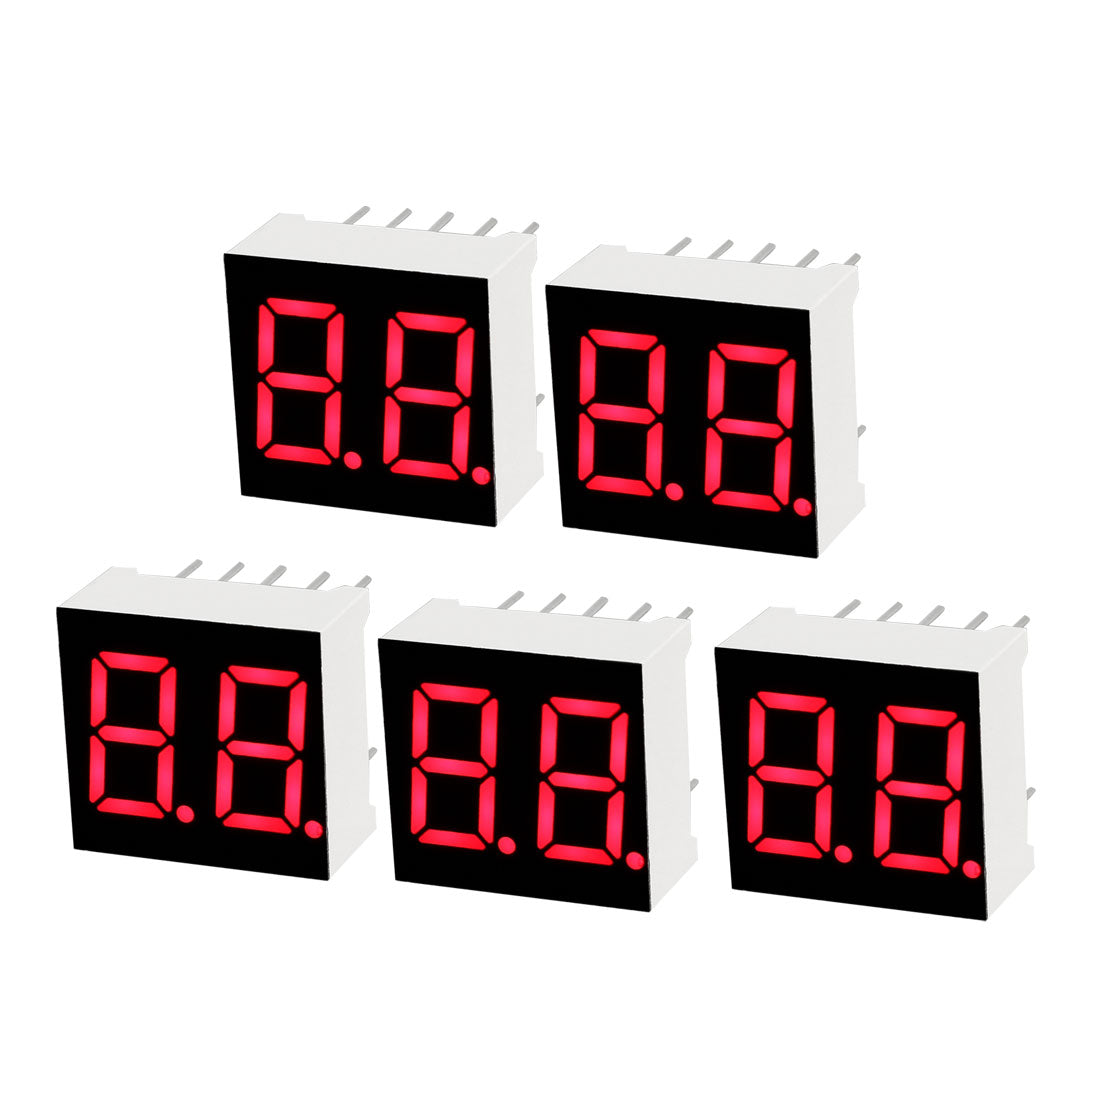 Uxcell Uxcell Common Anode 10 Pin 2 Bit 7 Segment 0.59 x 0.55 x 0.28 Inch 0.35" Red LED Display Digital Tube 3pcs